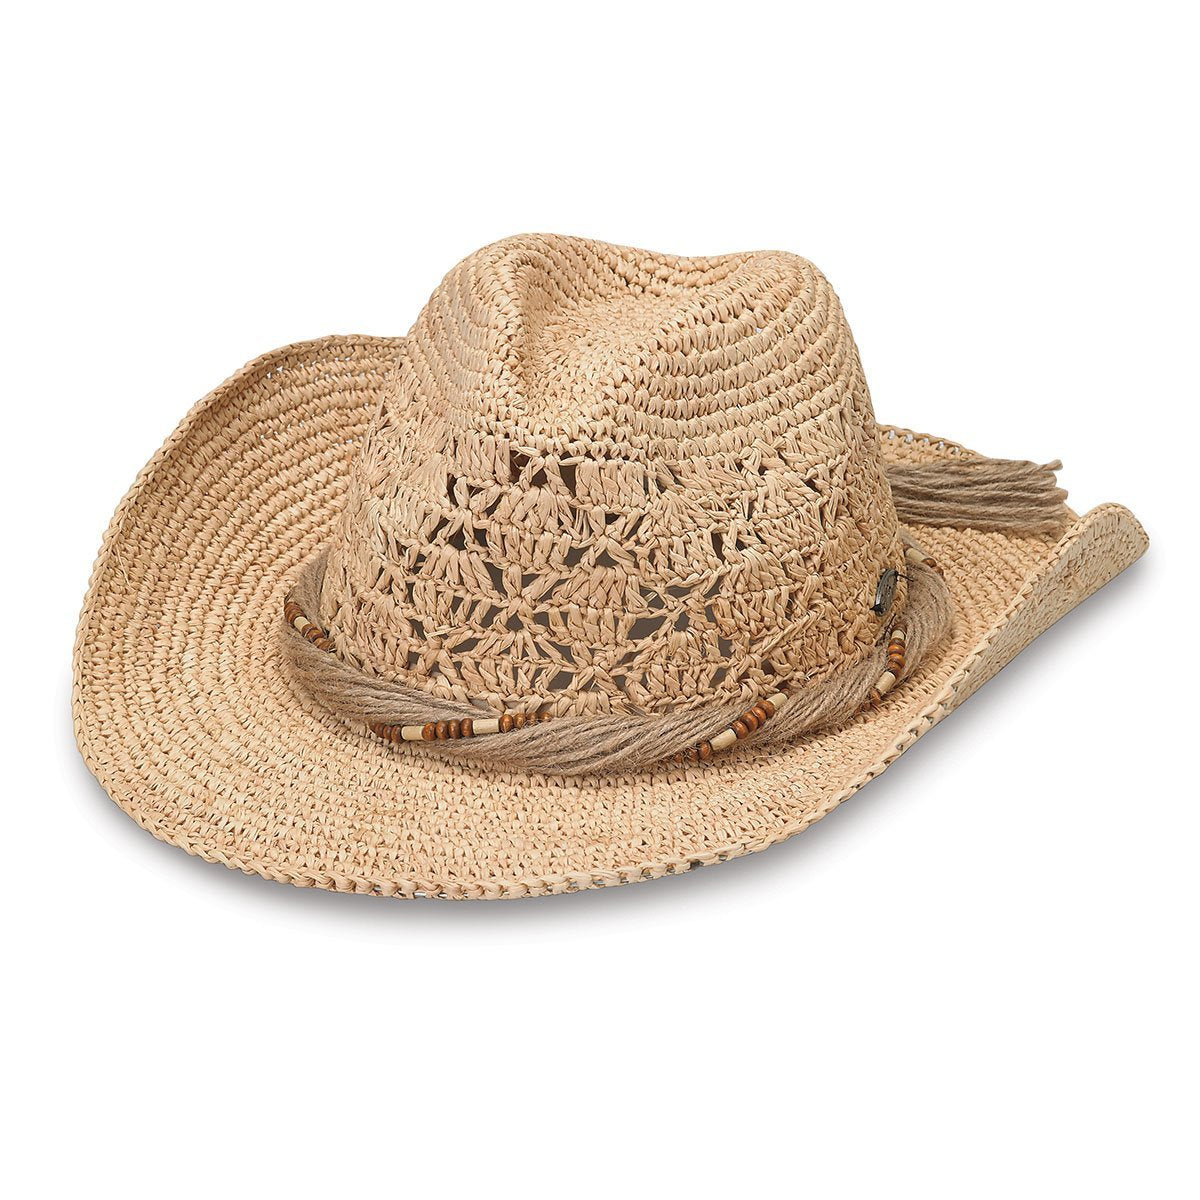 Featuring Front of Women's Tina Cowboy Hat made of Raffia in Natural from Wallaroo